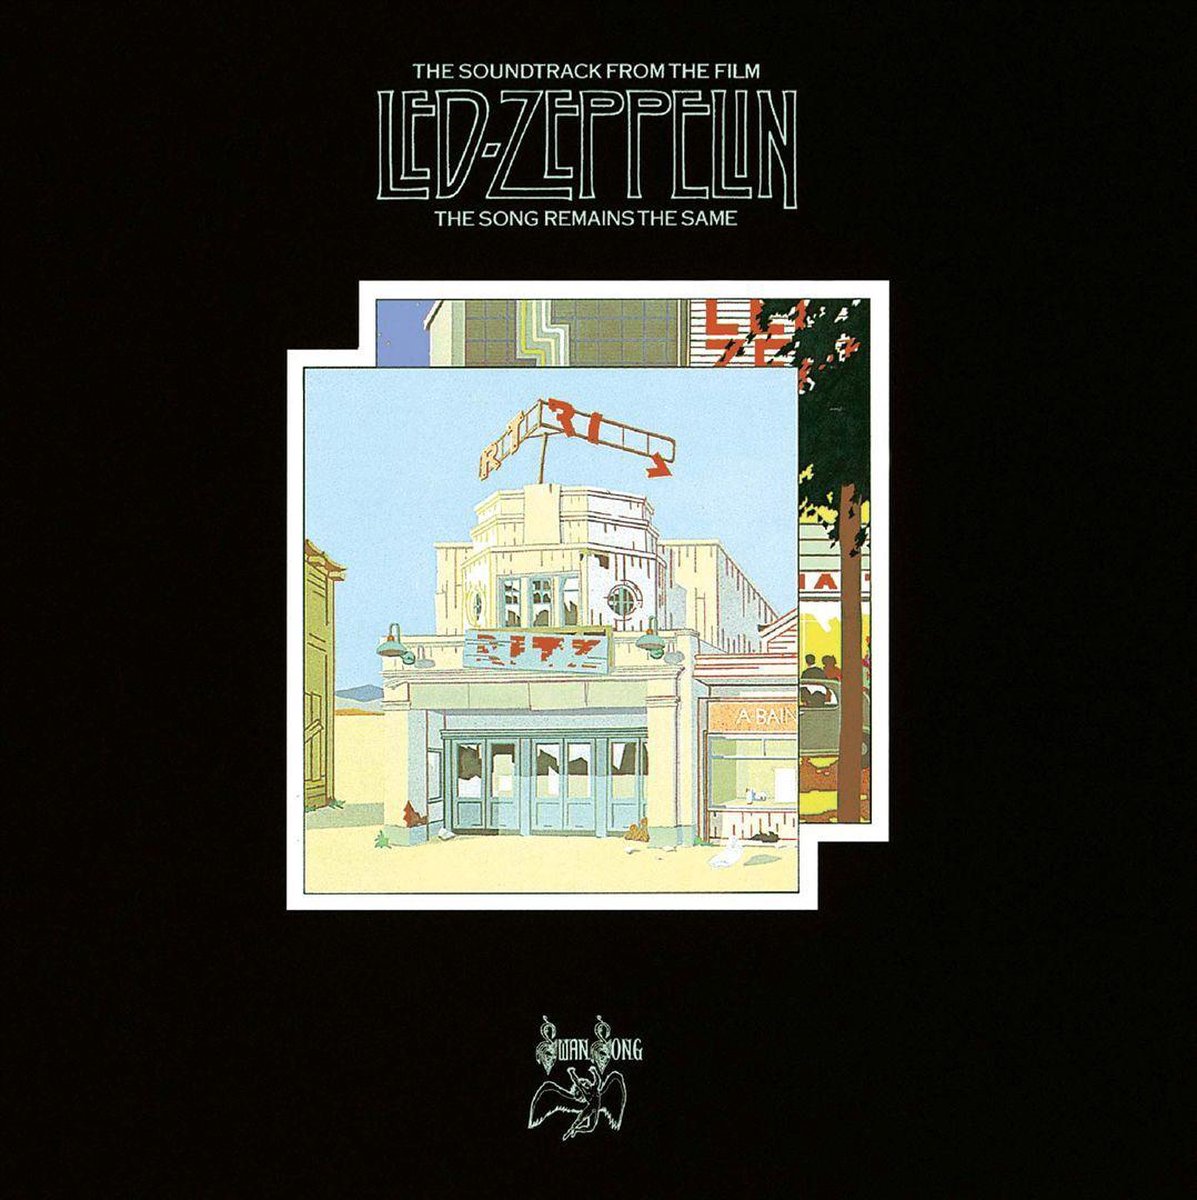 Led Zeppelin (1976) The Song Remains The Same (2007) 24-96